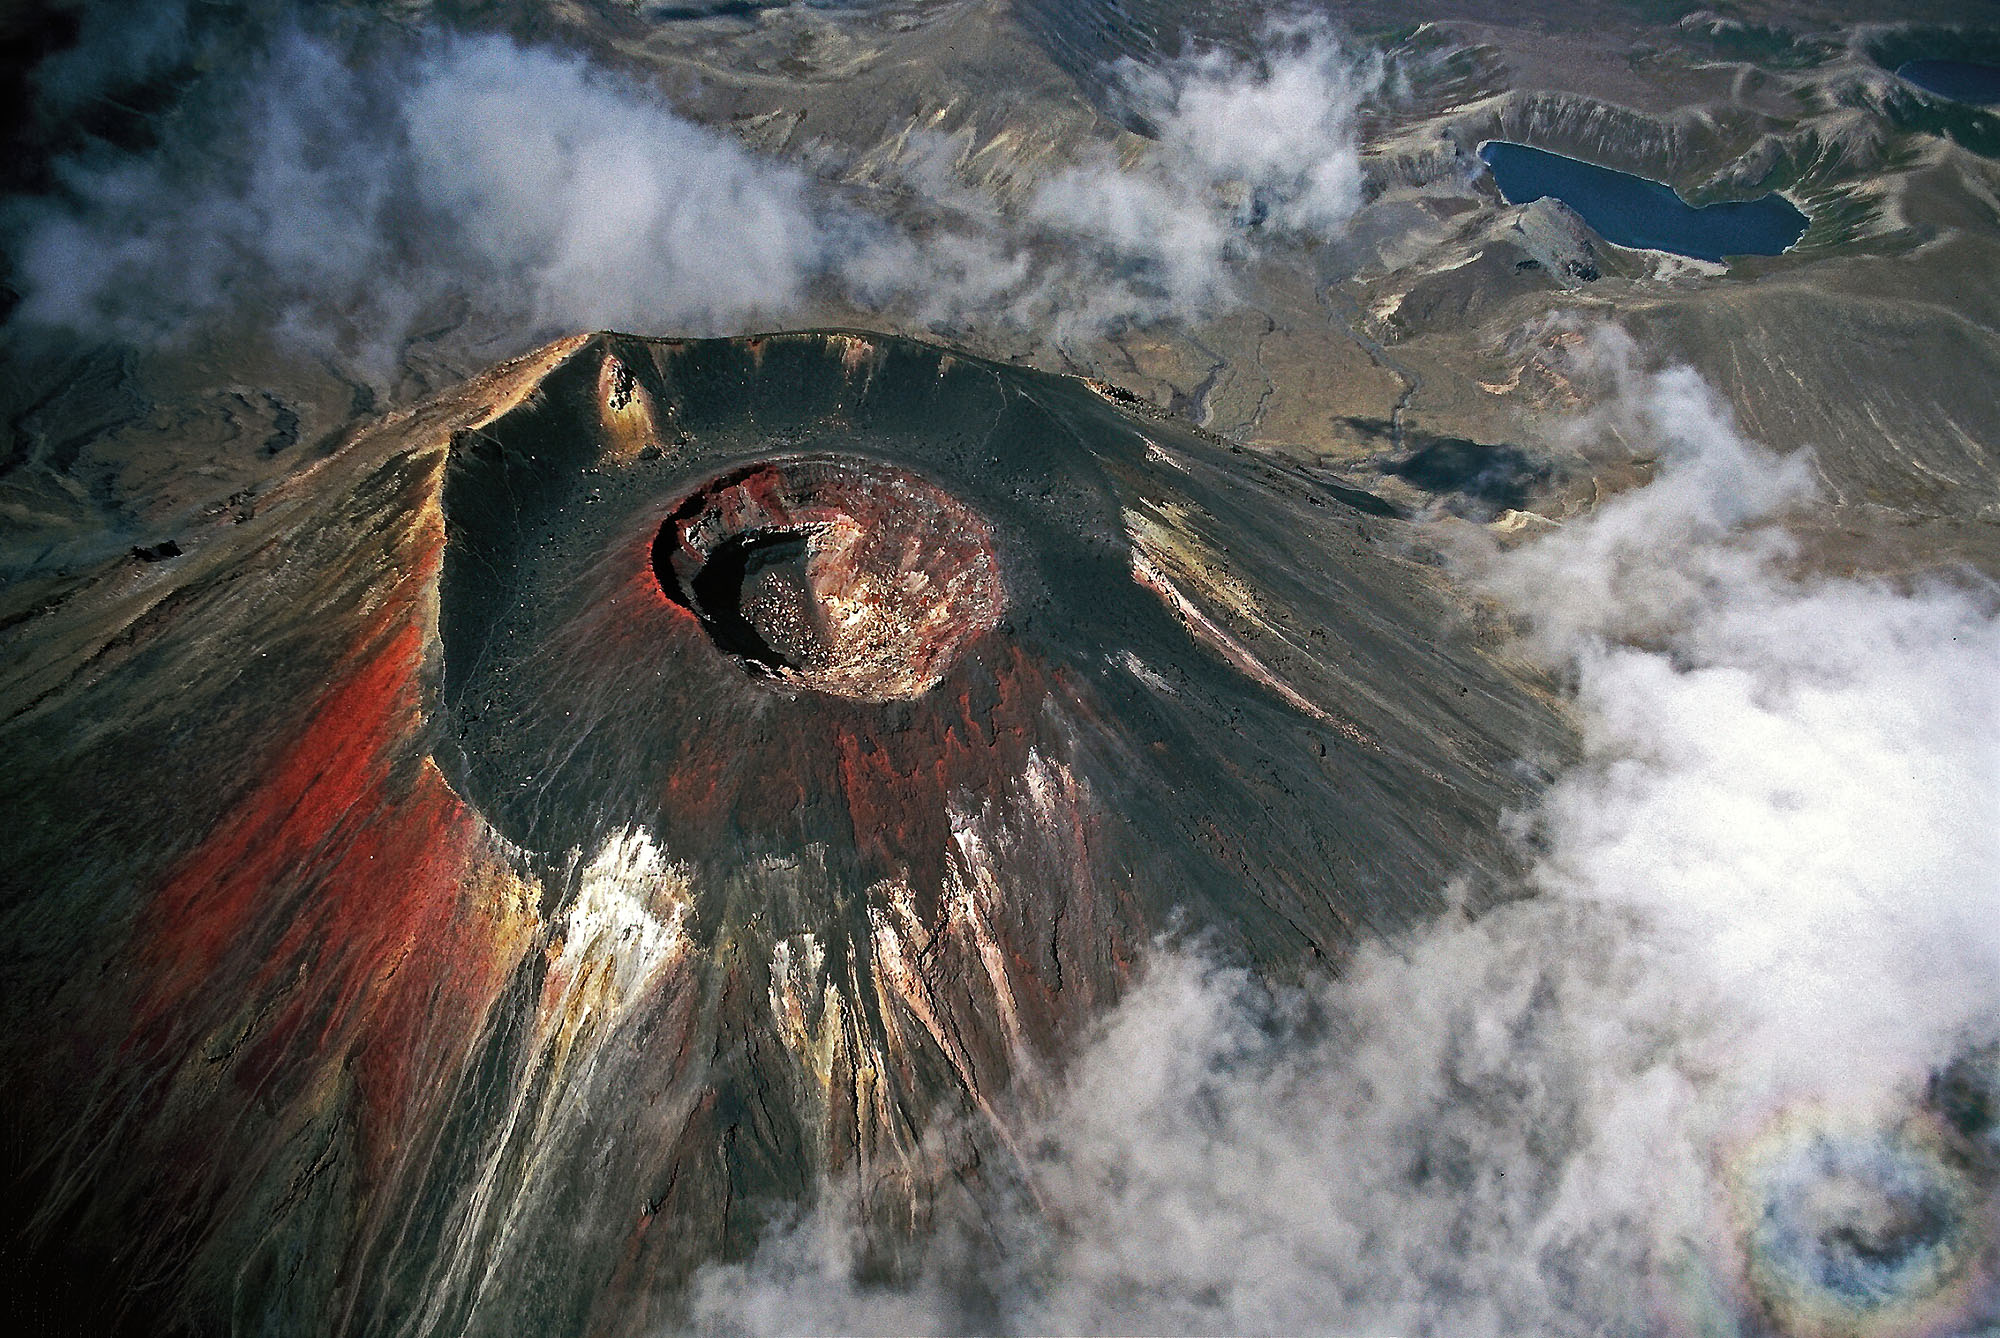 Aerial view of the Mount Ngauruhoe volcanic crater in New Zealand with its colorful lava, ash and pumice.